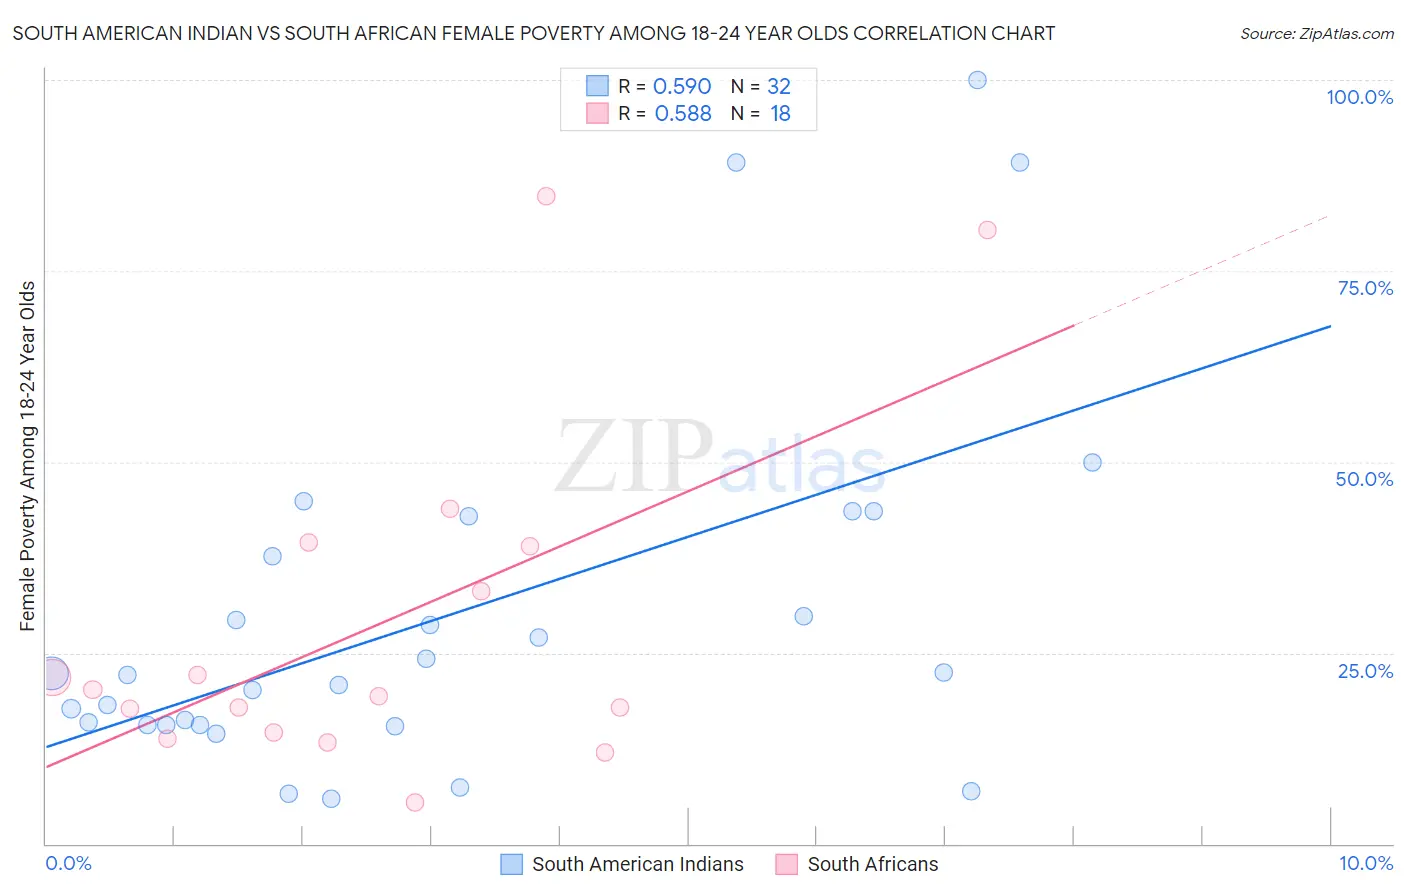 South American Indian vs South African Female Poverty Among 18-24 Year Olds